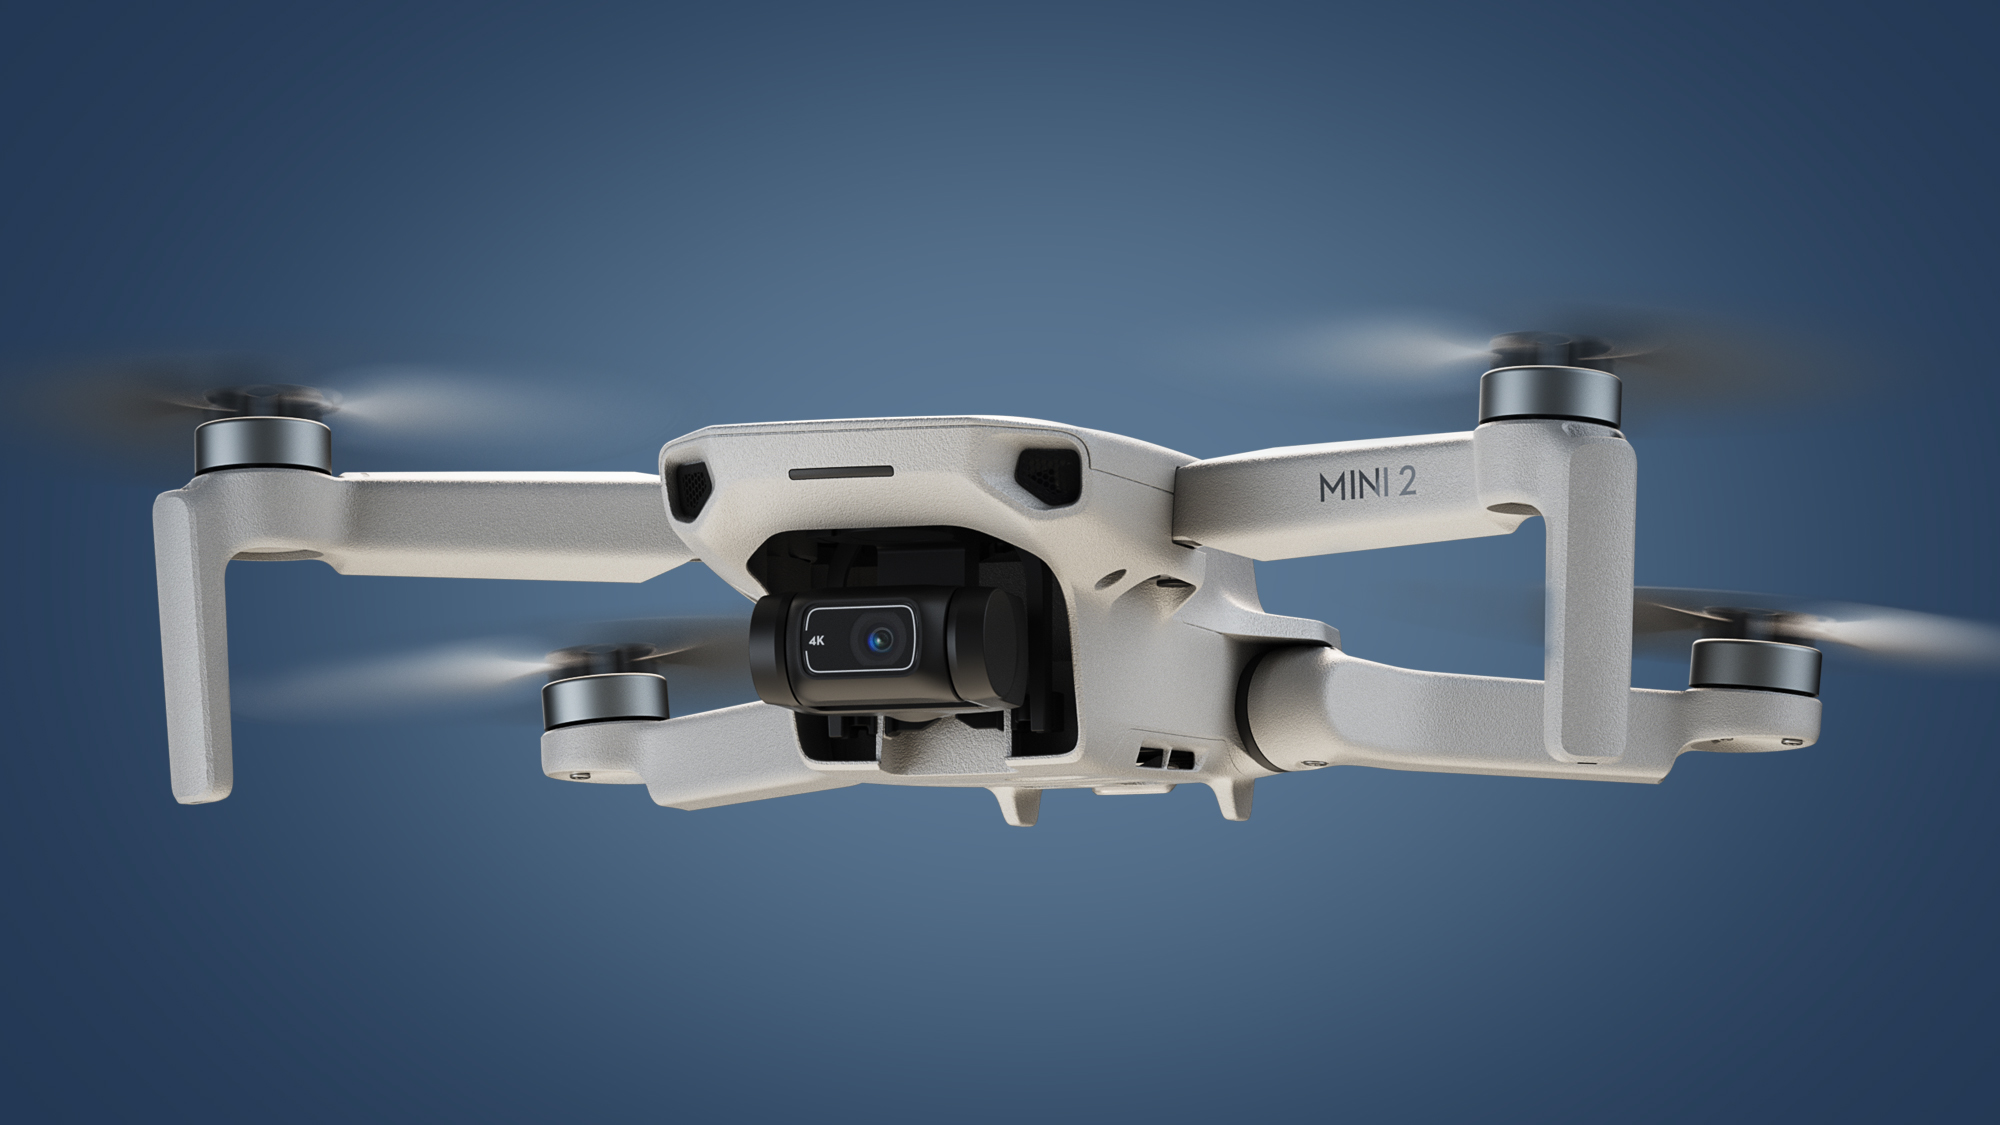 DJI confirms battery issues for its Mini 2 drone: Digital